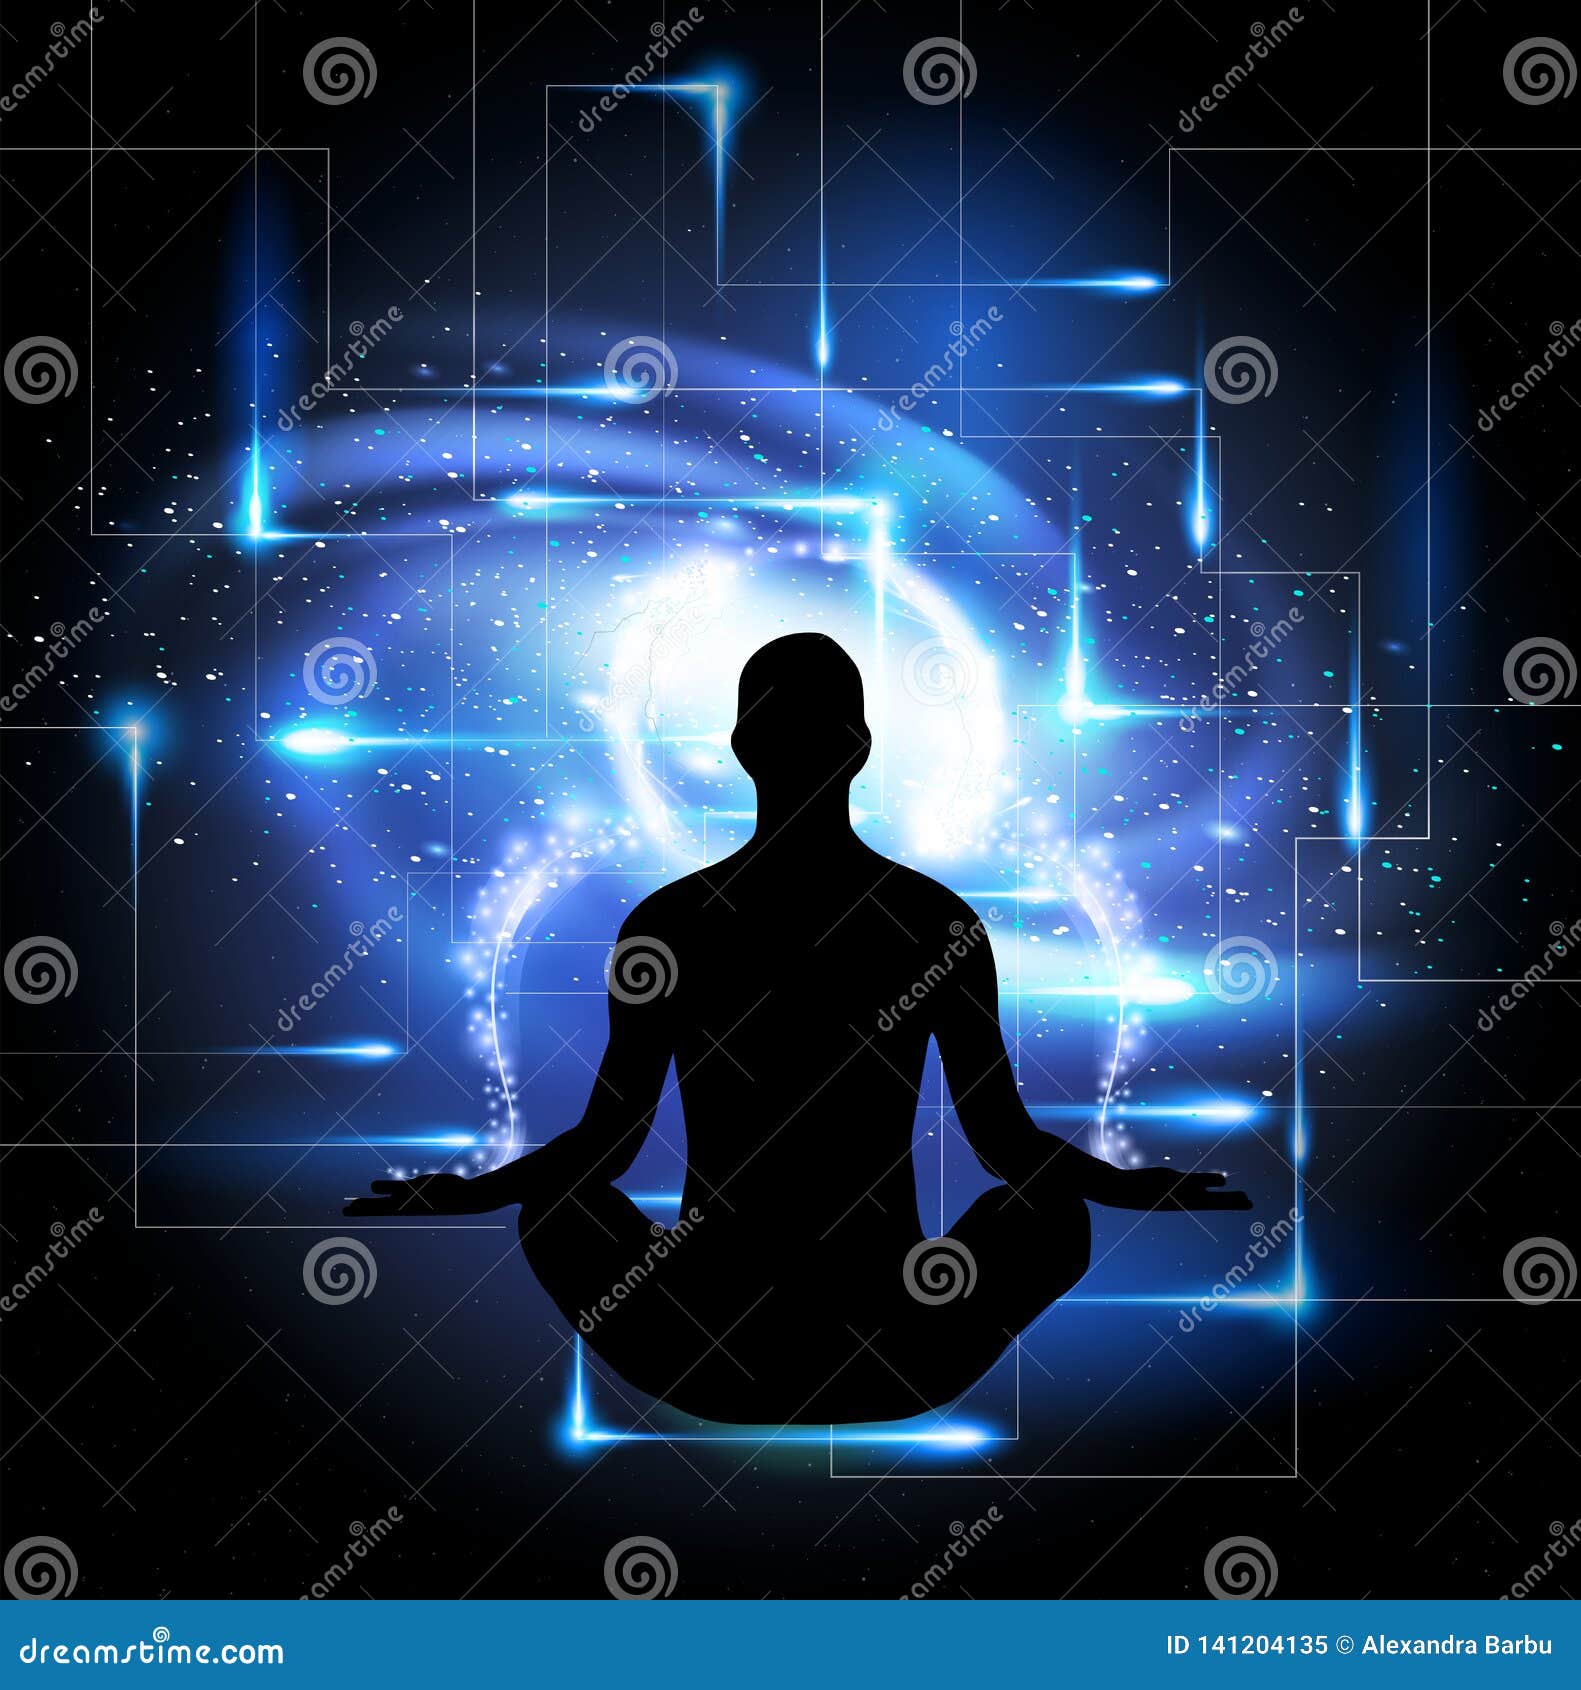 Spiritual Healing, Meditation, Reality Shift, Manifestation with Blue and White Energy Stock Vector - Illustration of challenge, abstract: 141204135